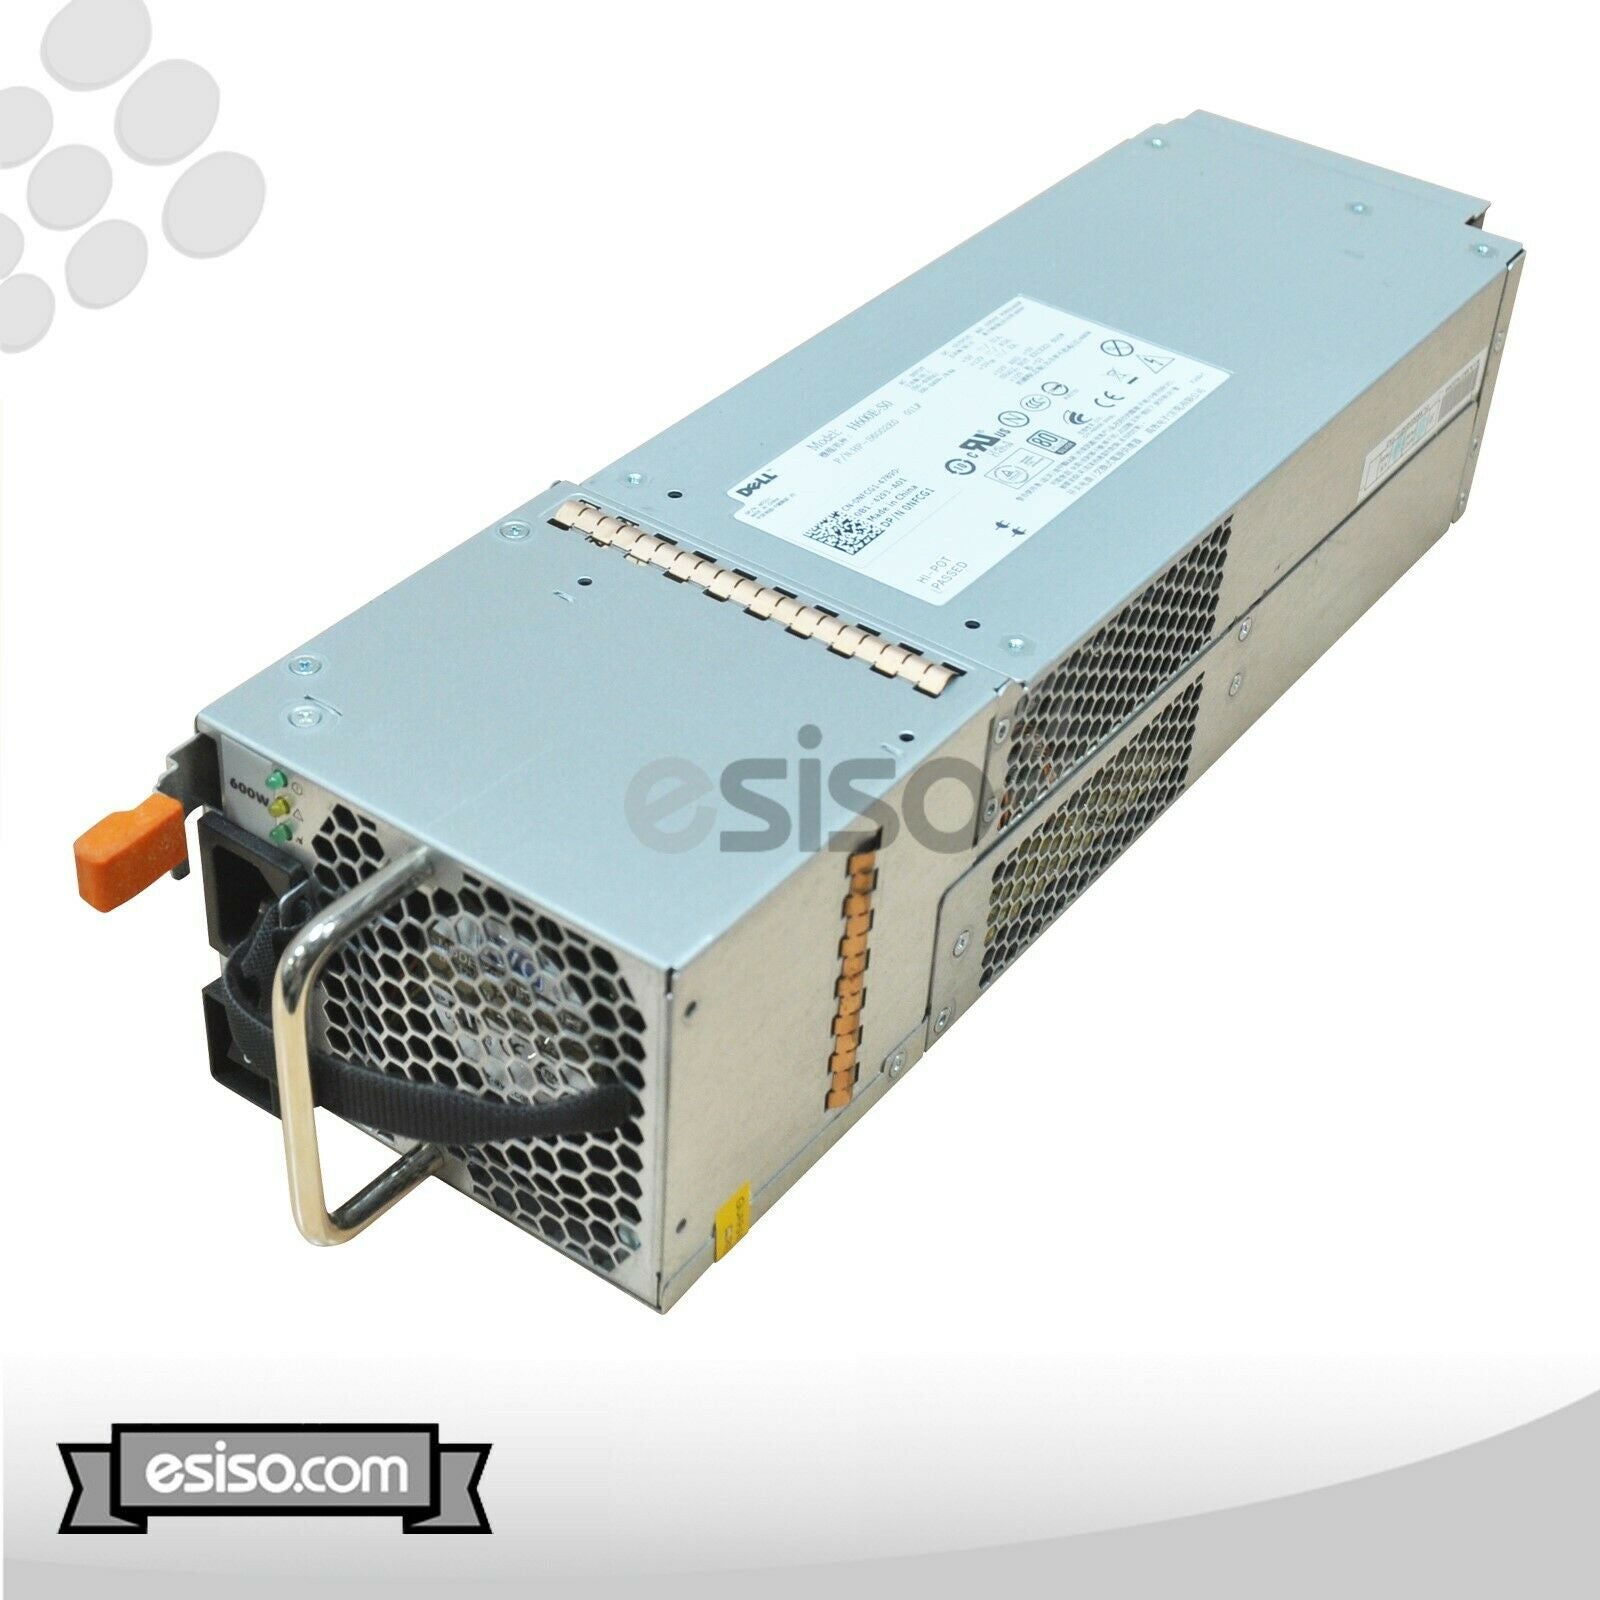 NFCG1 0NFCG1 HP-S6002E0 DELL POWERVAULT MD3220 600W HOT SWAP POWER SUPPLY